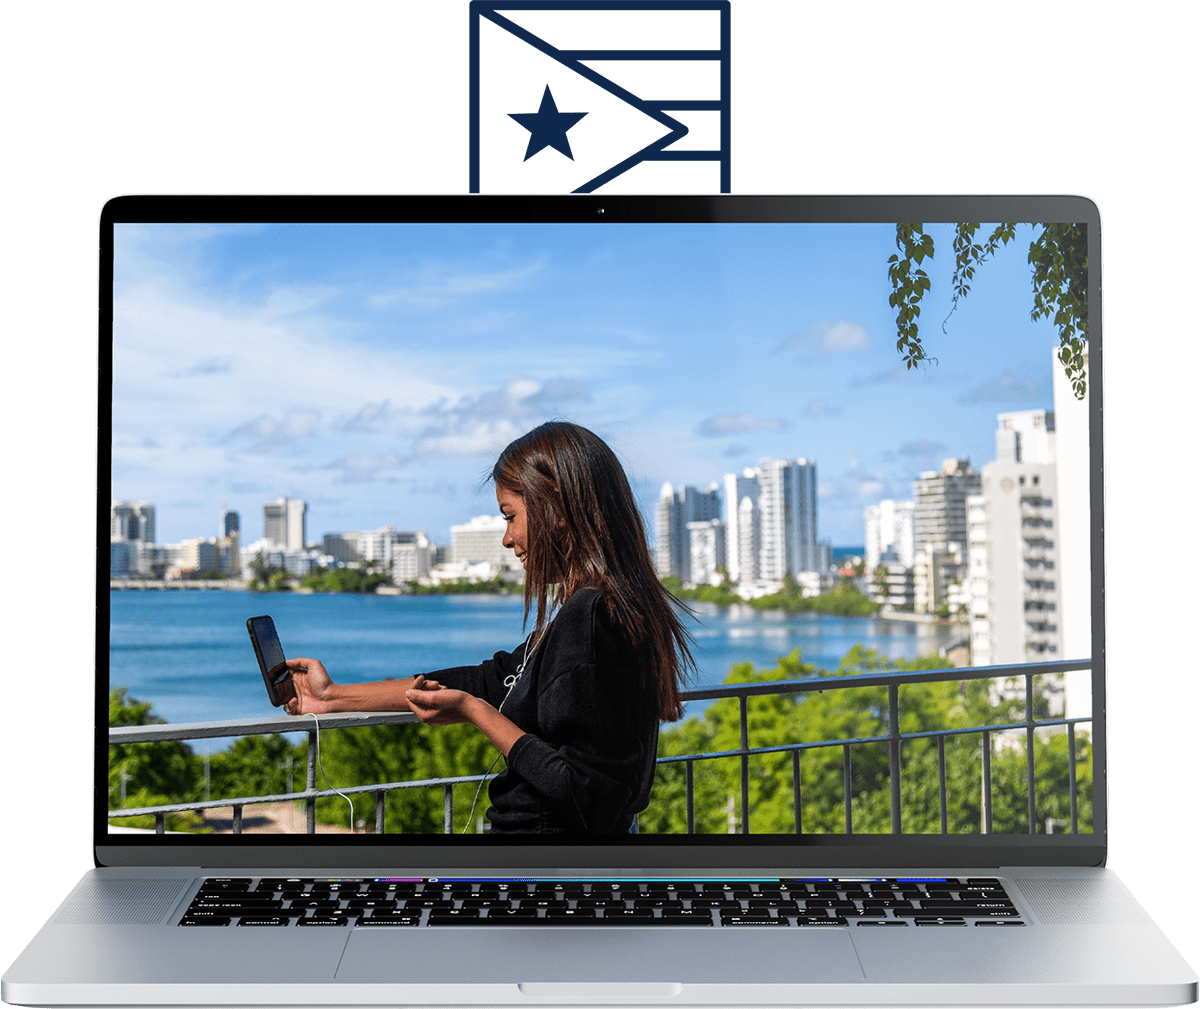 Woman on a balcony with a view of Puerto Rico's Condado lagoon landscape.